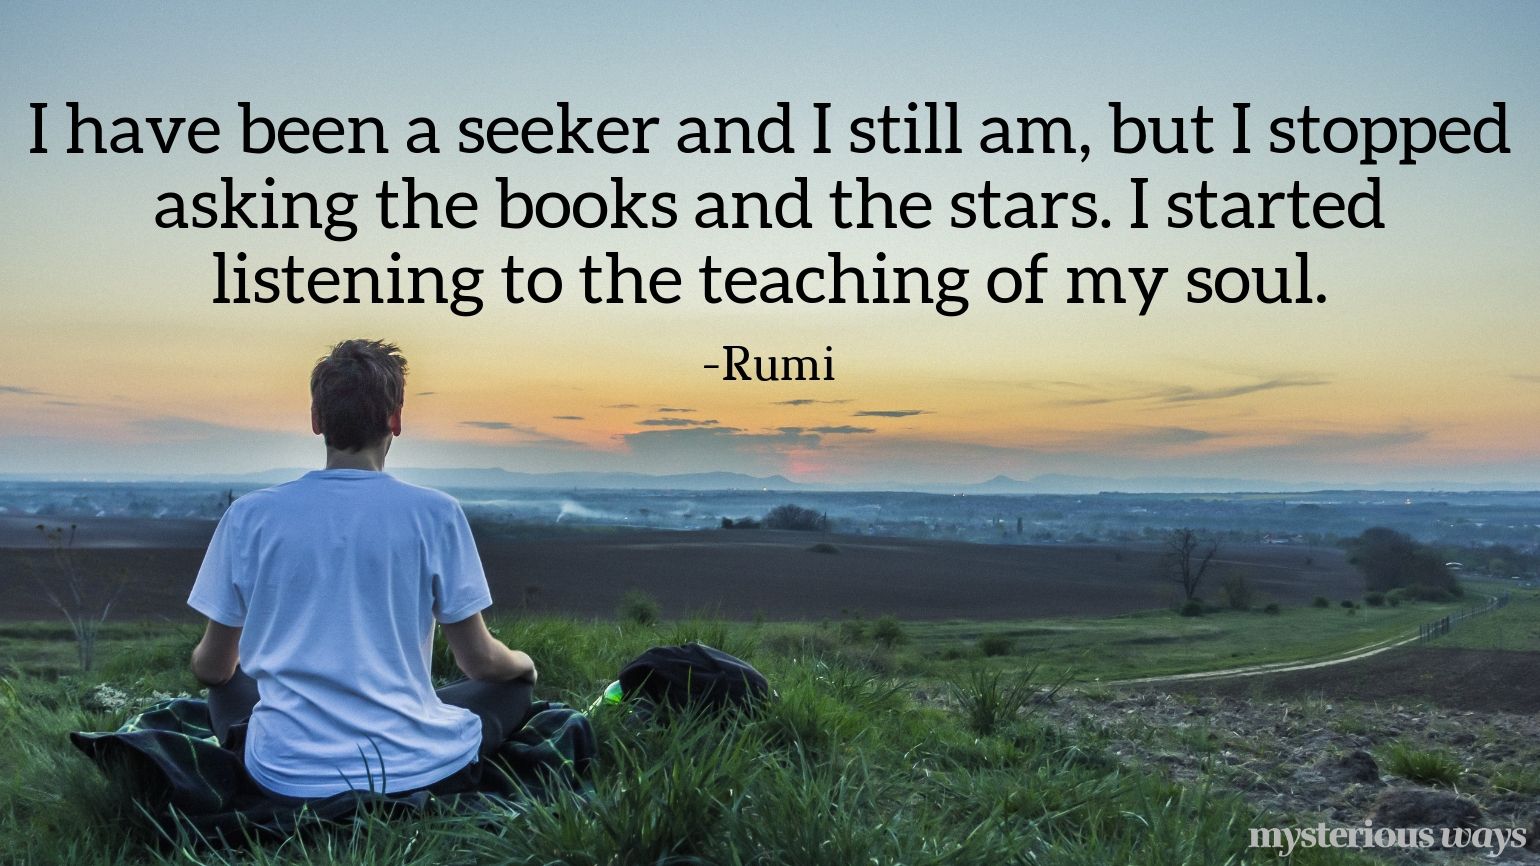 I have been a seeker and I still am, but I stopped asking the books and the stars. I started listening to the teaching of my soul. —Rumi